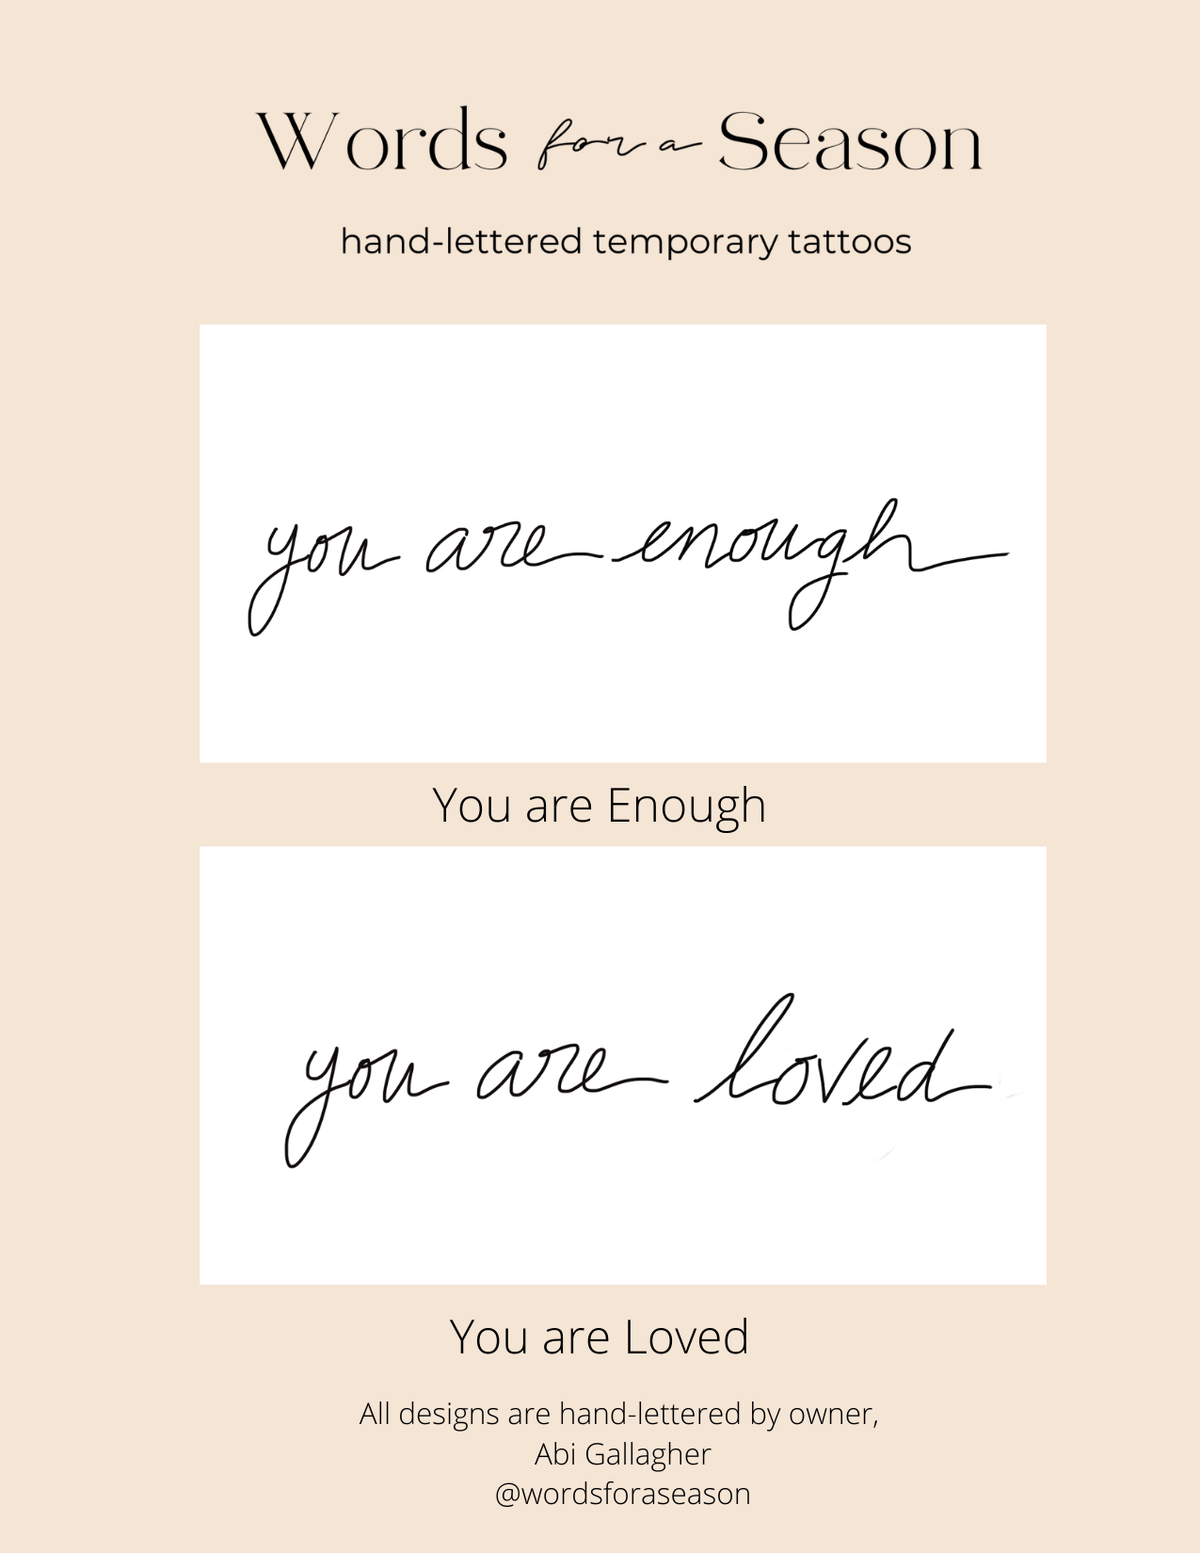 Get inspired and boost your mental health with these powerful words from Words for a Season! The 2-pack, You Are, features our most popular phrases and all temporary tattoos are hand-drawn by owner Abi Gallagher. Give the gift of motivation with this multi-pack, perfect for a friend or daughter!